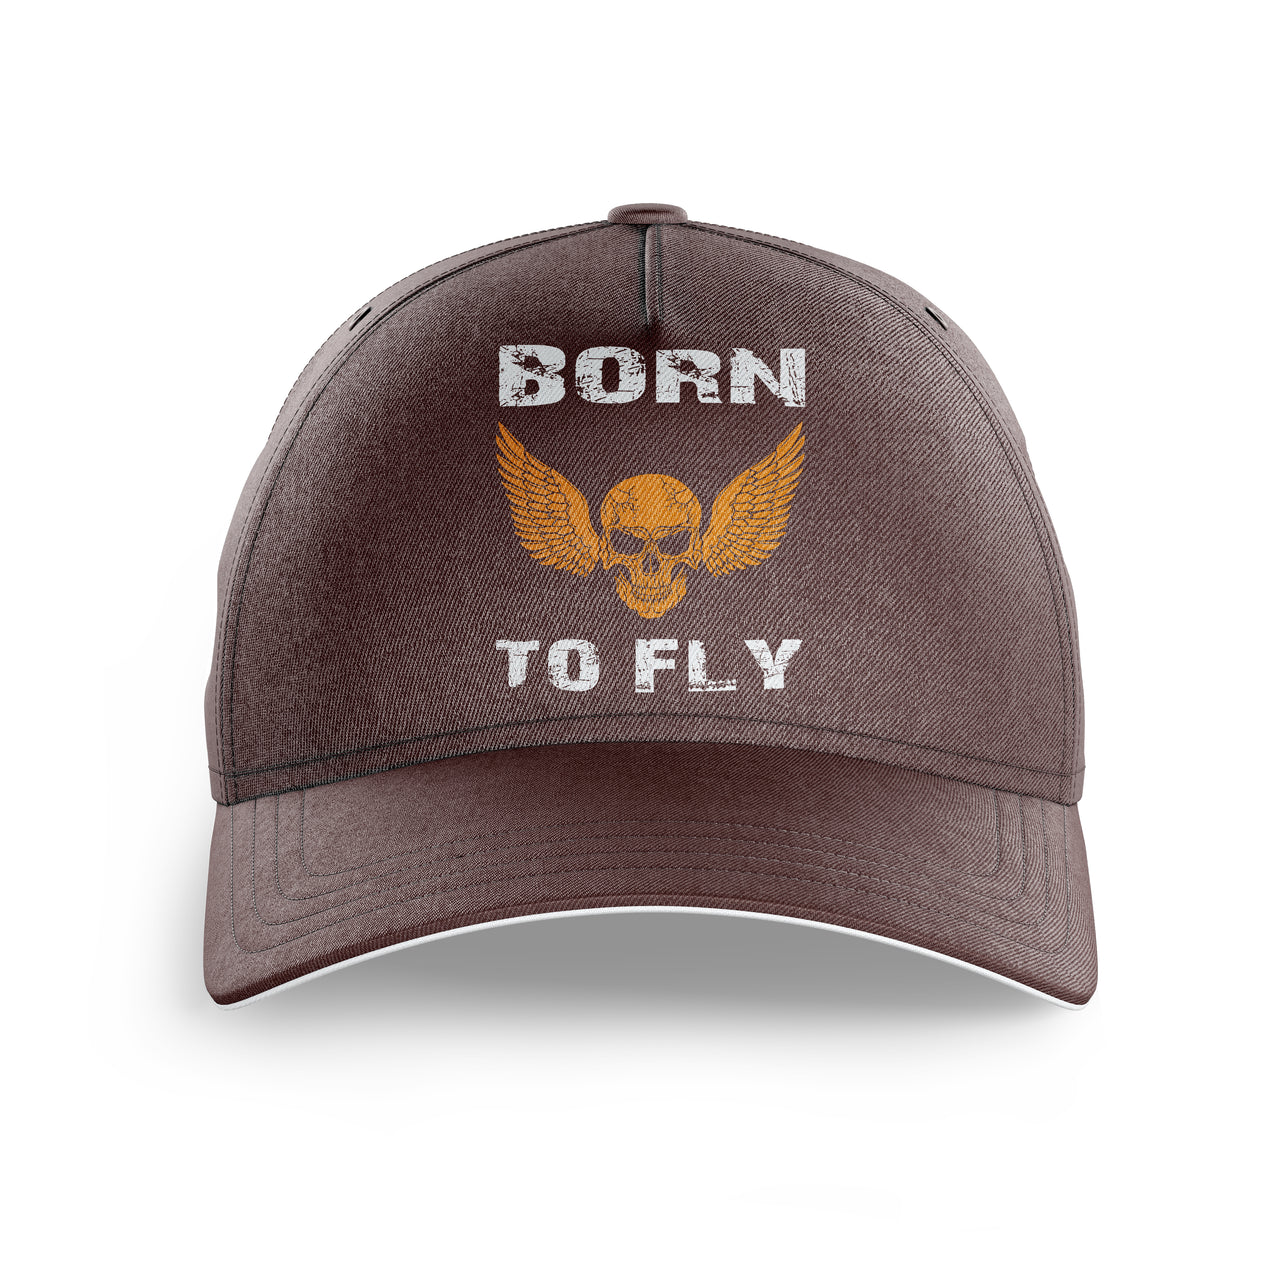 Born To Fly SKELETON Printed Hats